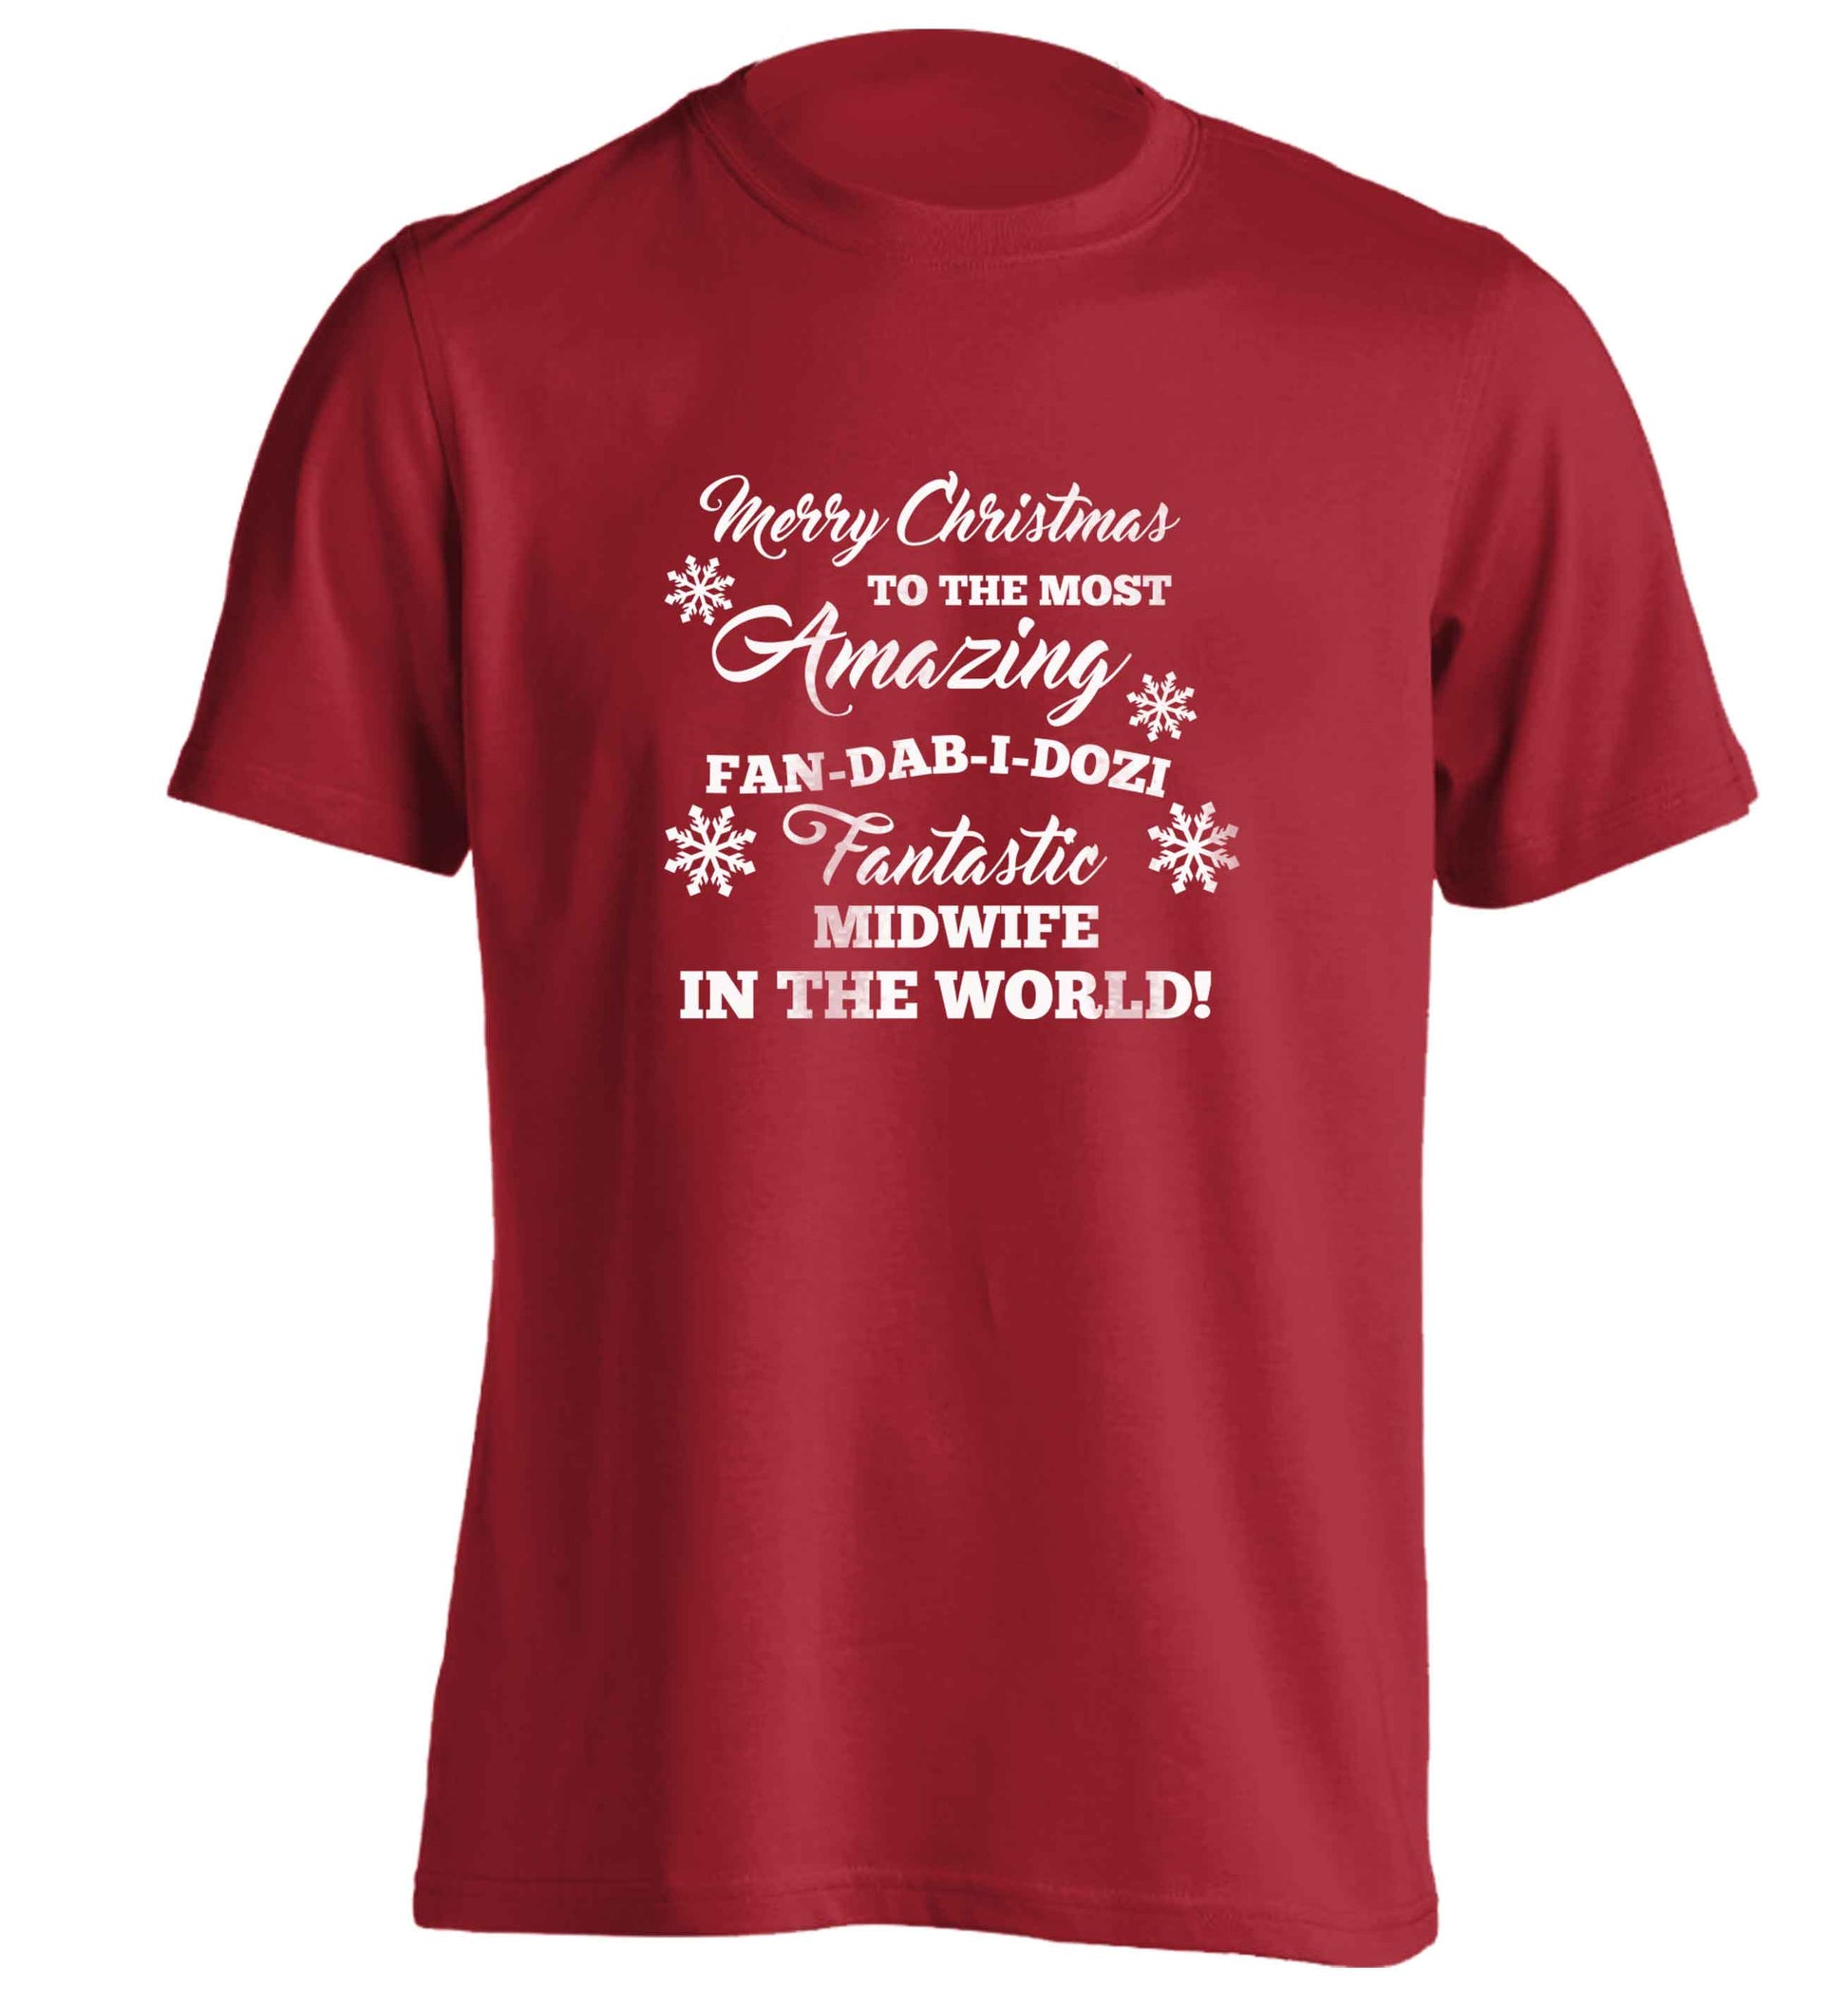 Merry Christmas to the most amazing midwife in the world! adults unisex red Tshirt 2XL